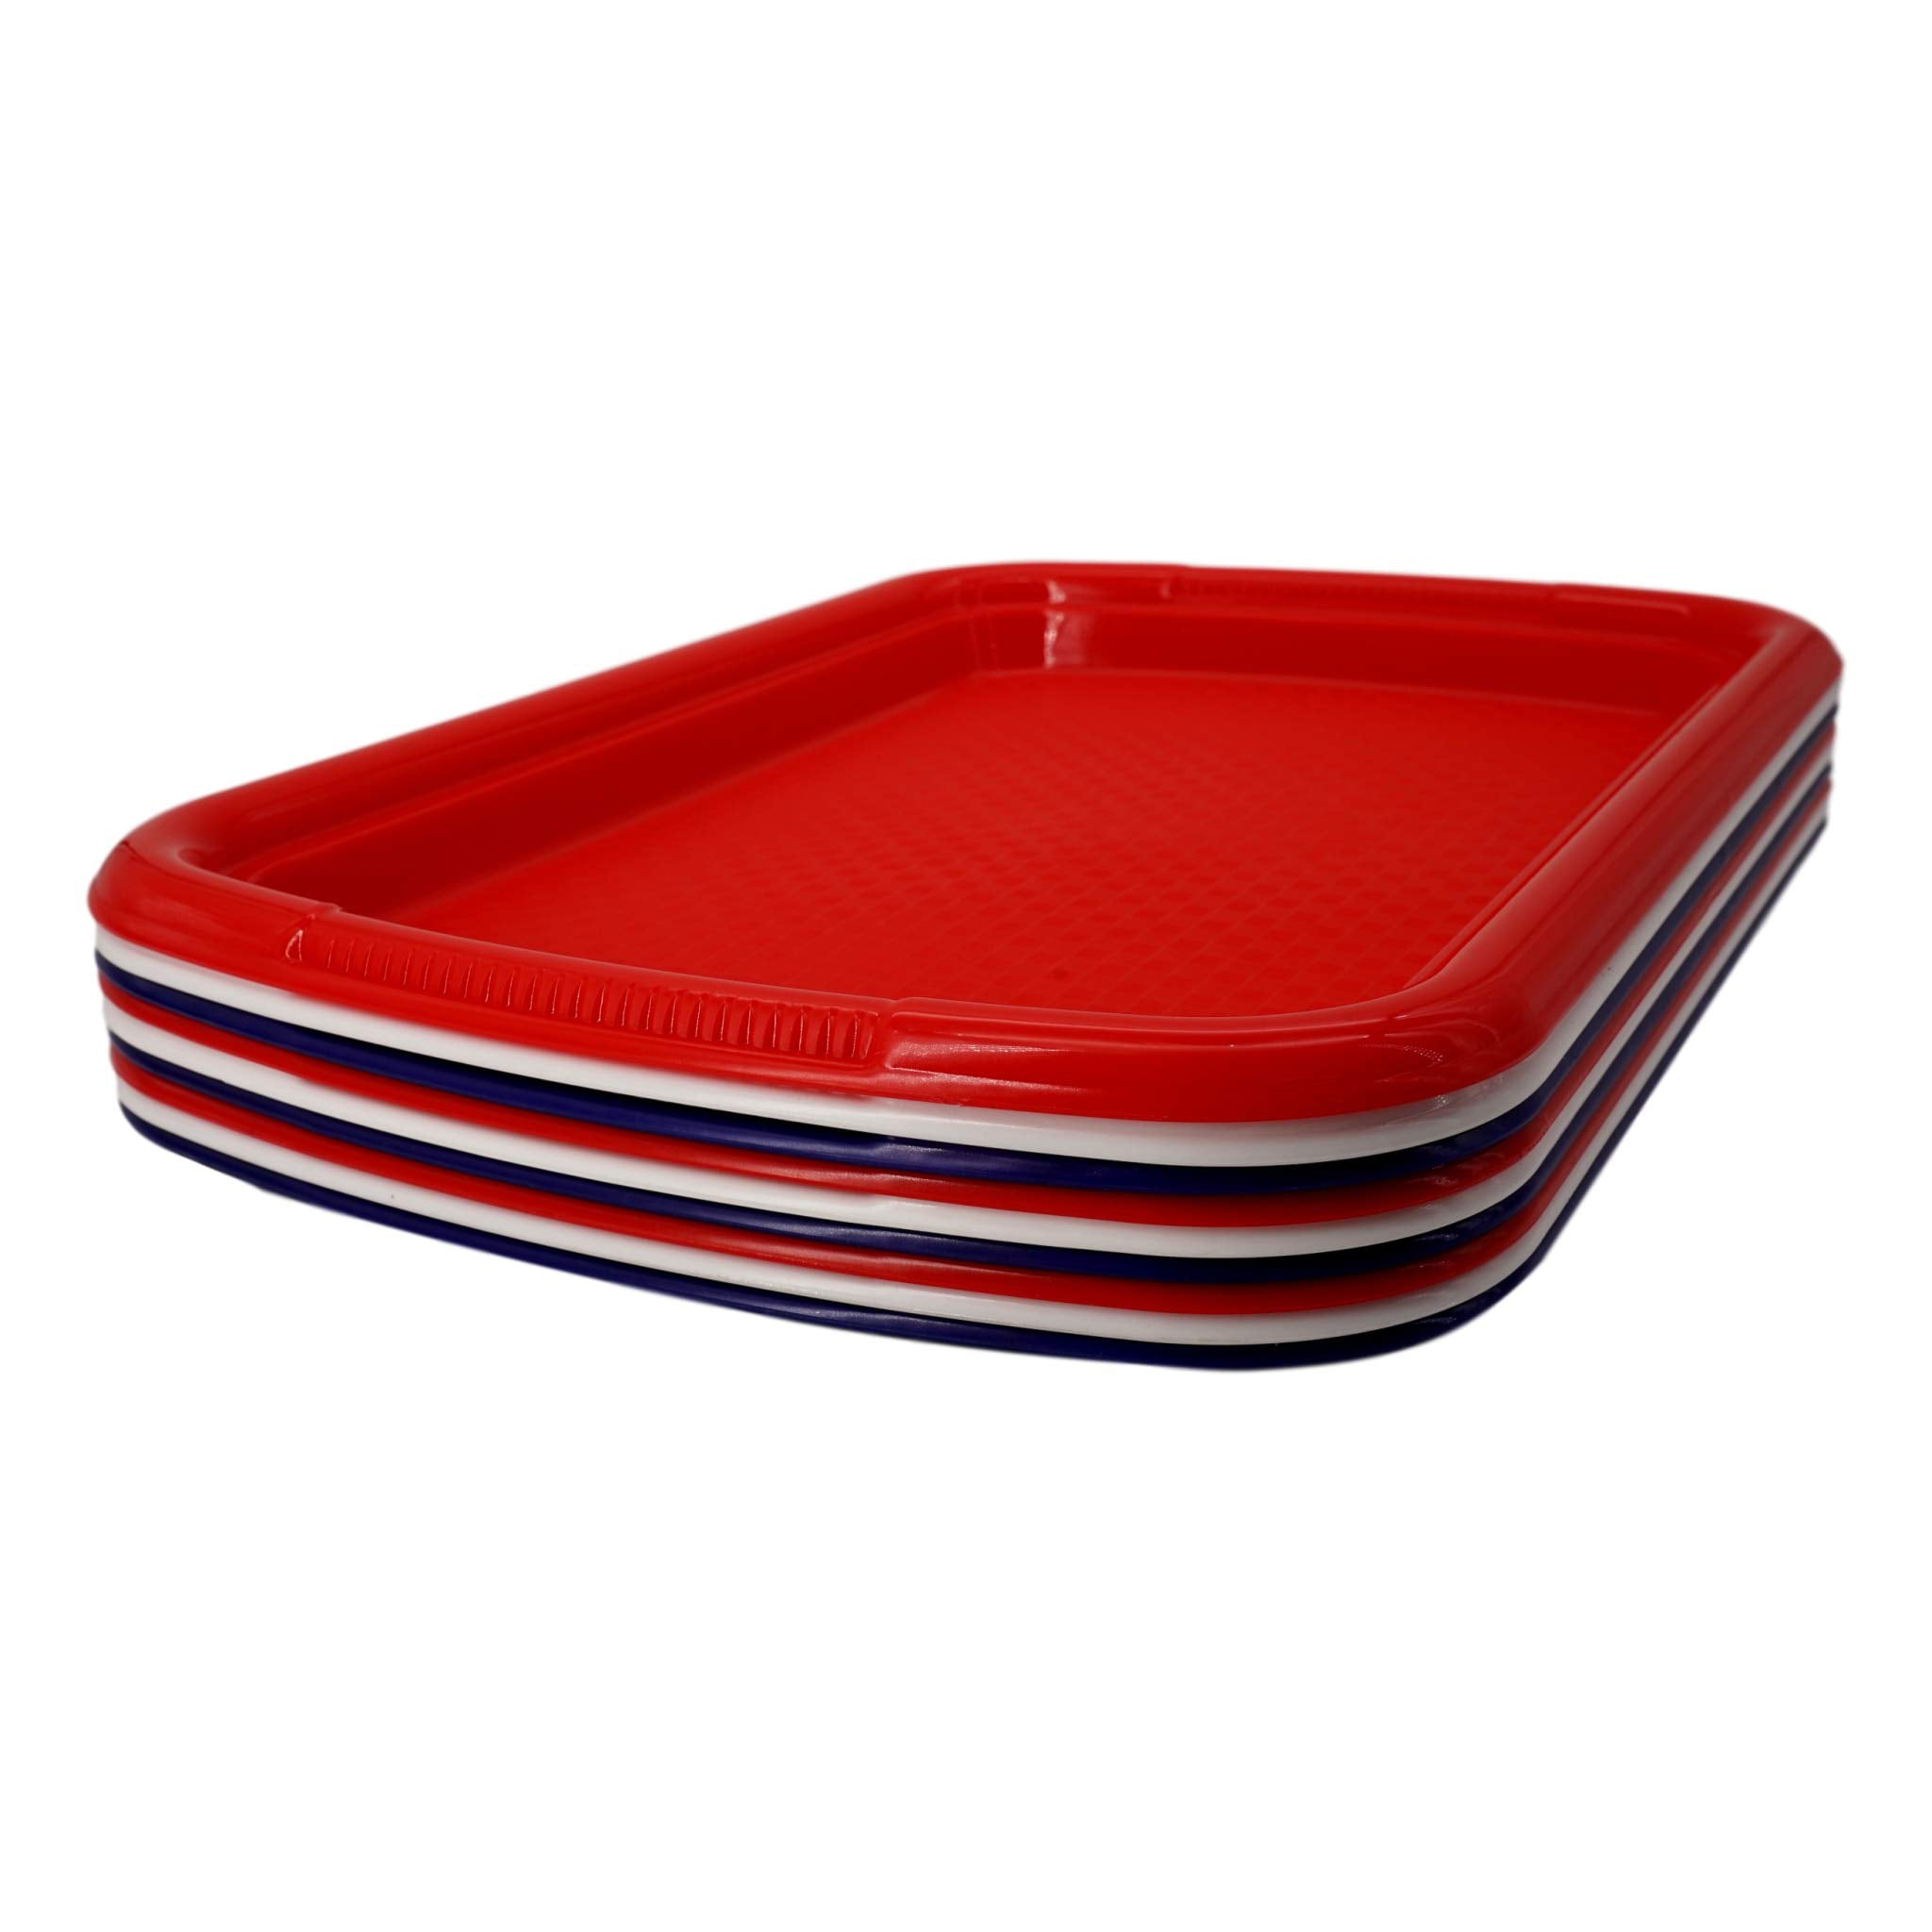 Details about  / Rectangular Plastic Trays 9 Trays - Red, White, Blue Measure 15.4 in x 10.4